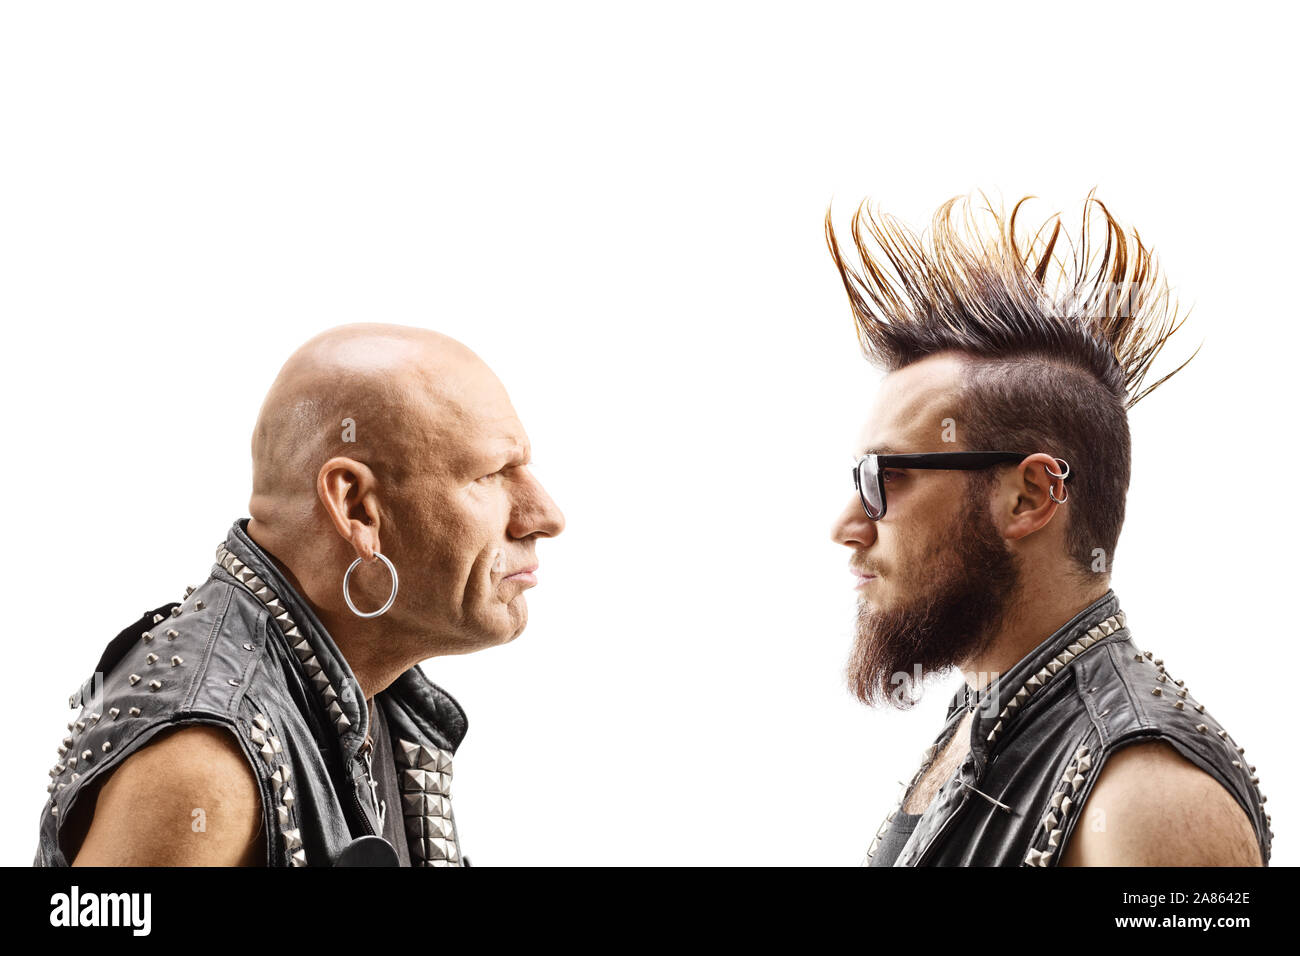 Young punker with a mohawk and an older bald punker looking at each other isolated on white background Stock Photo